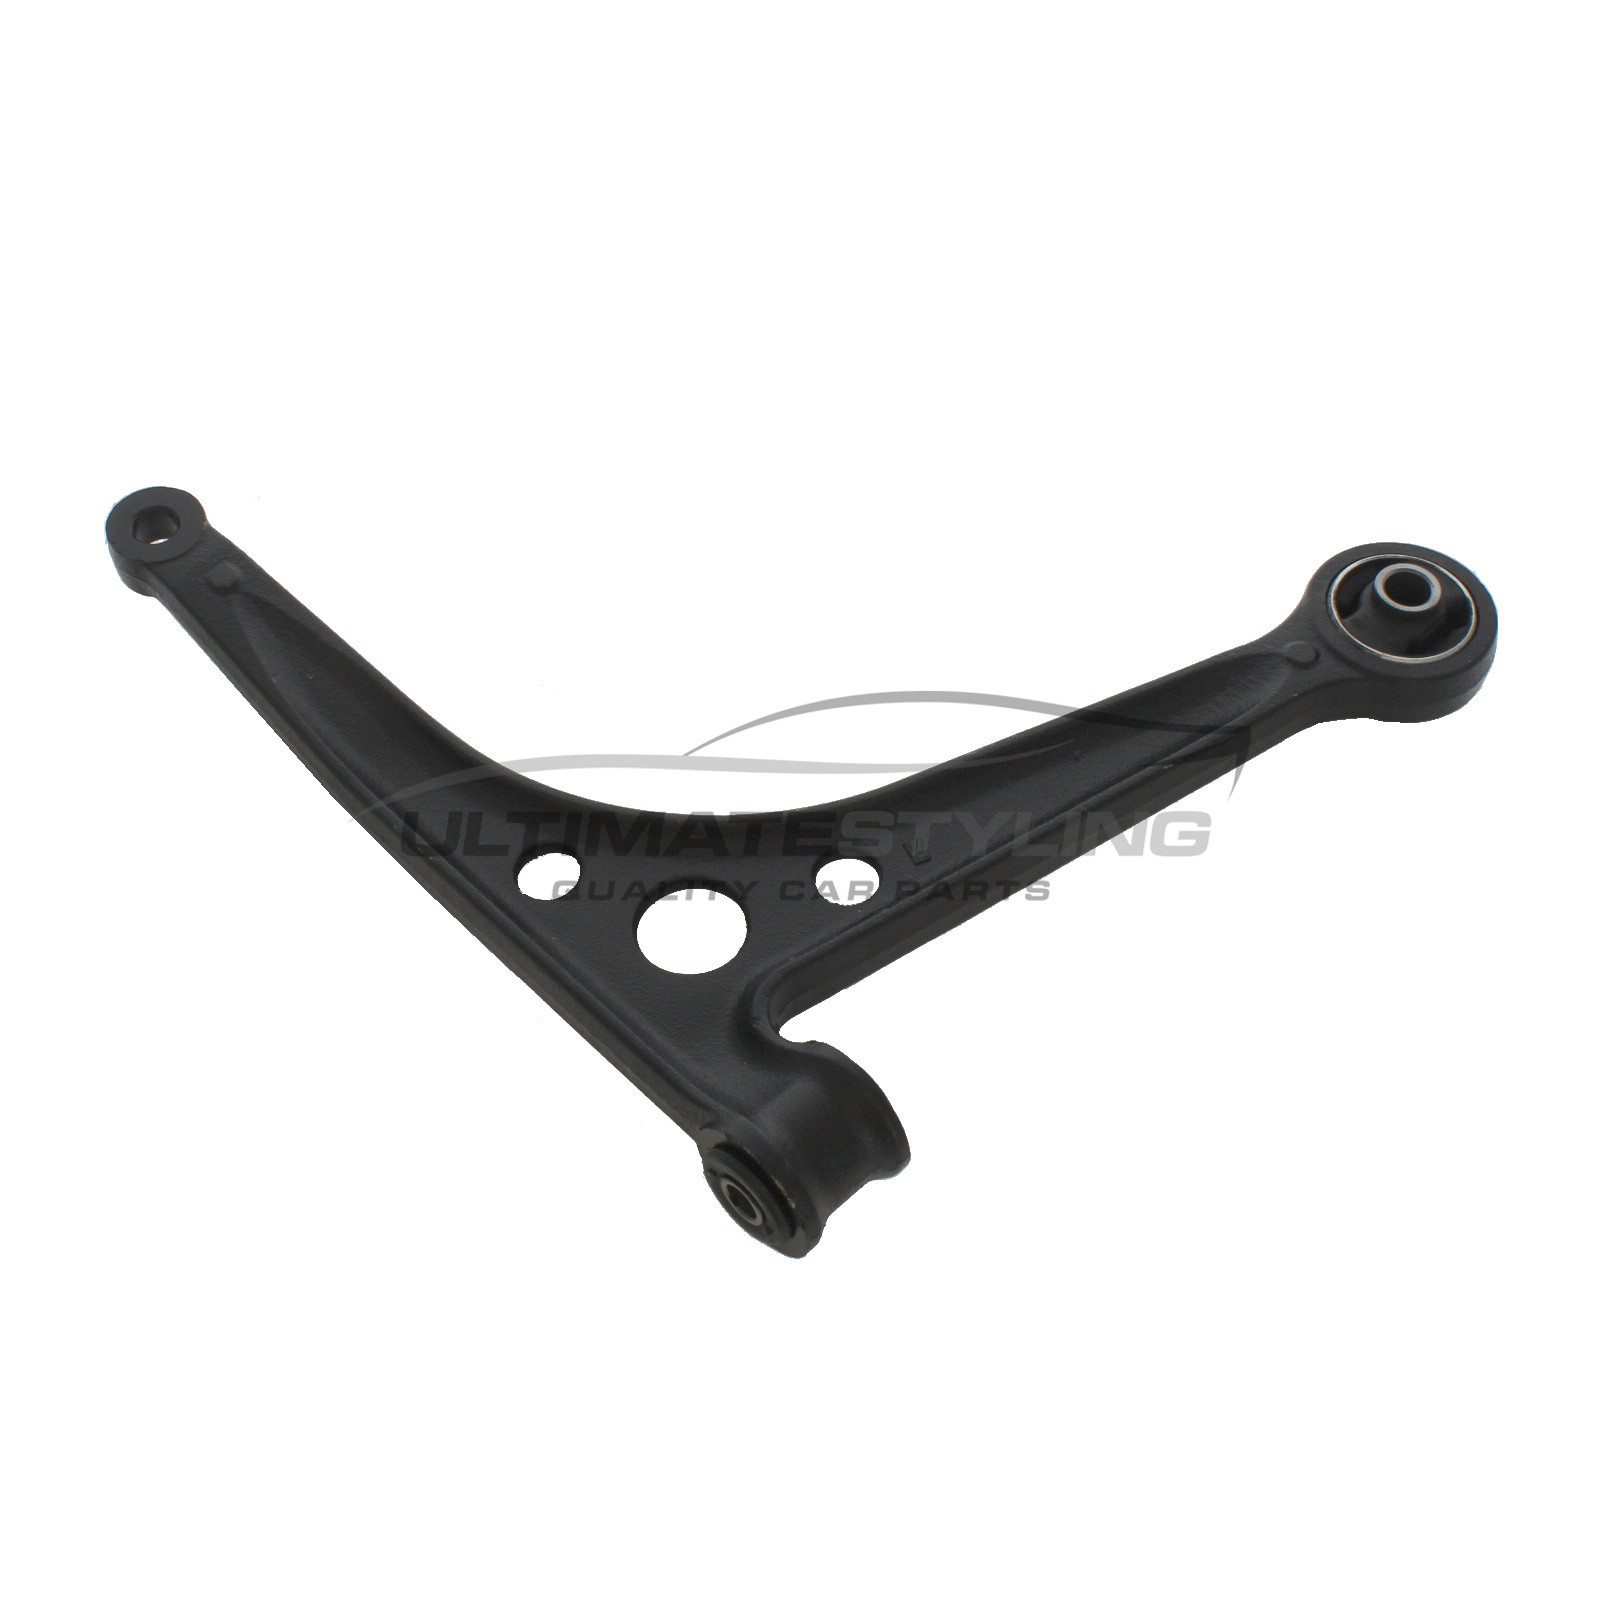 Ford Galaxy 1995-2006, Seat Alhambra 1996-2011, VW Sharan 1995-2011 Front Lower Suspension Arm (Cast Iron) Excluding Ball Joint and Rear Bush Passenger Side (LH)